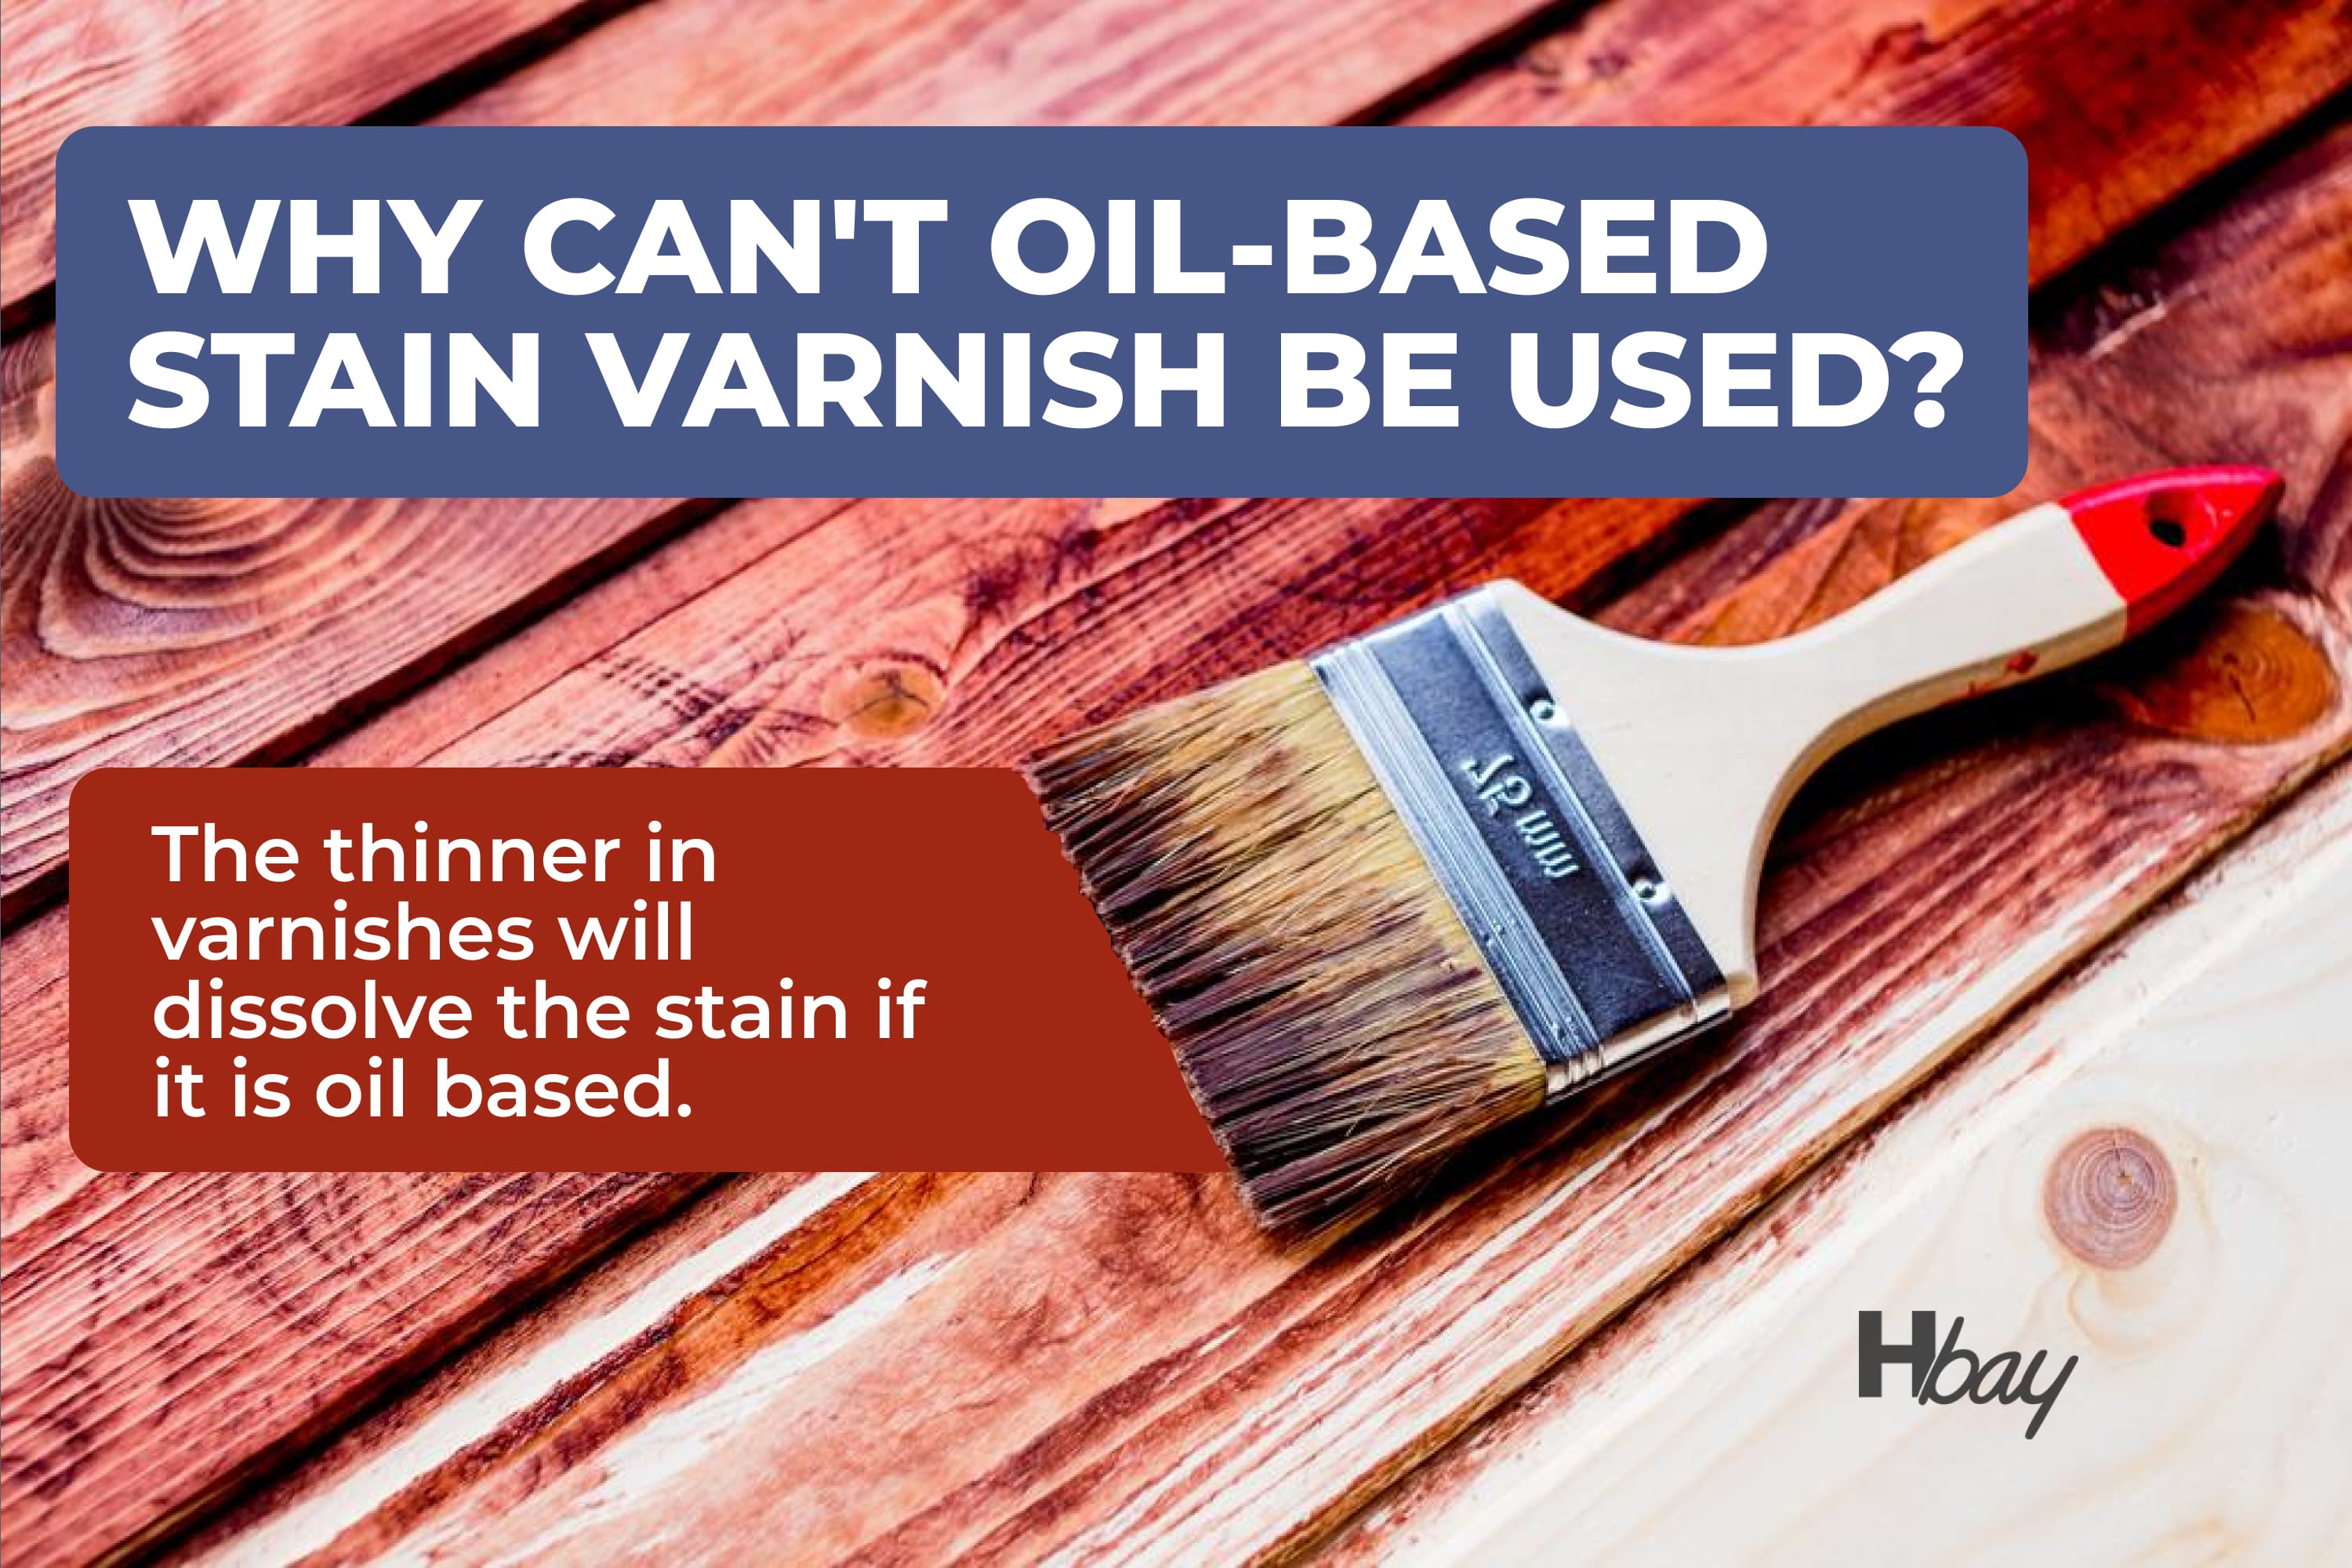 Why can’t oil based stain varnish be used